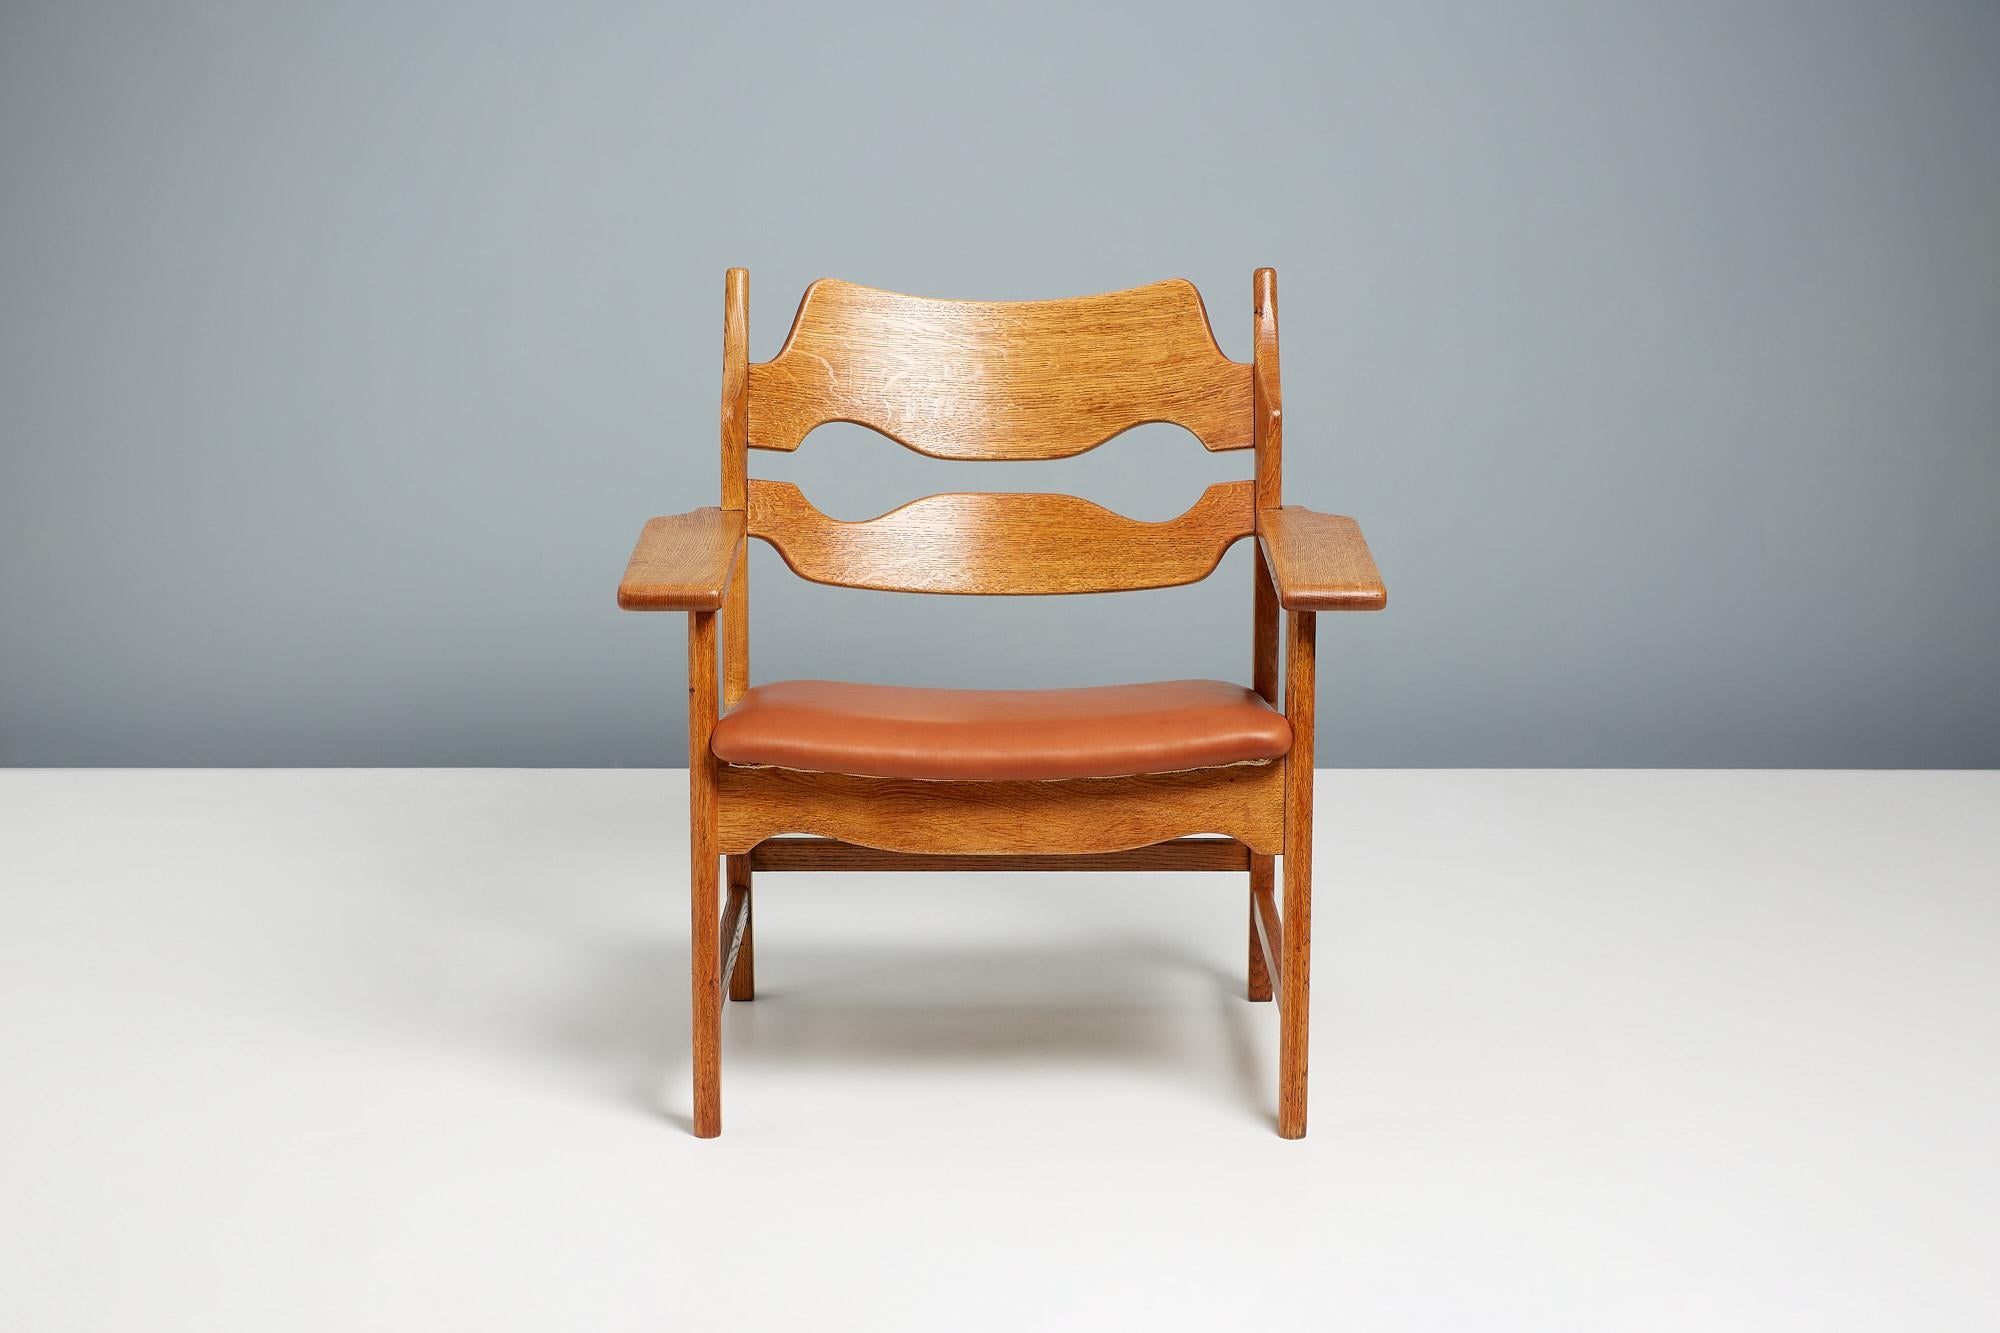 Henning Kjaernulf - Razor Blade chairs, 1960

Unique lounge chairs manufactured by Nyrup Møbelfabrik, Denmark 1960. The chair features razor blade shaped carved backs and thick, wide arms all made from oiled, patinated oak. Seats upholstered in